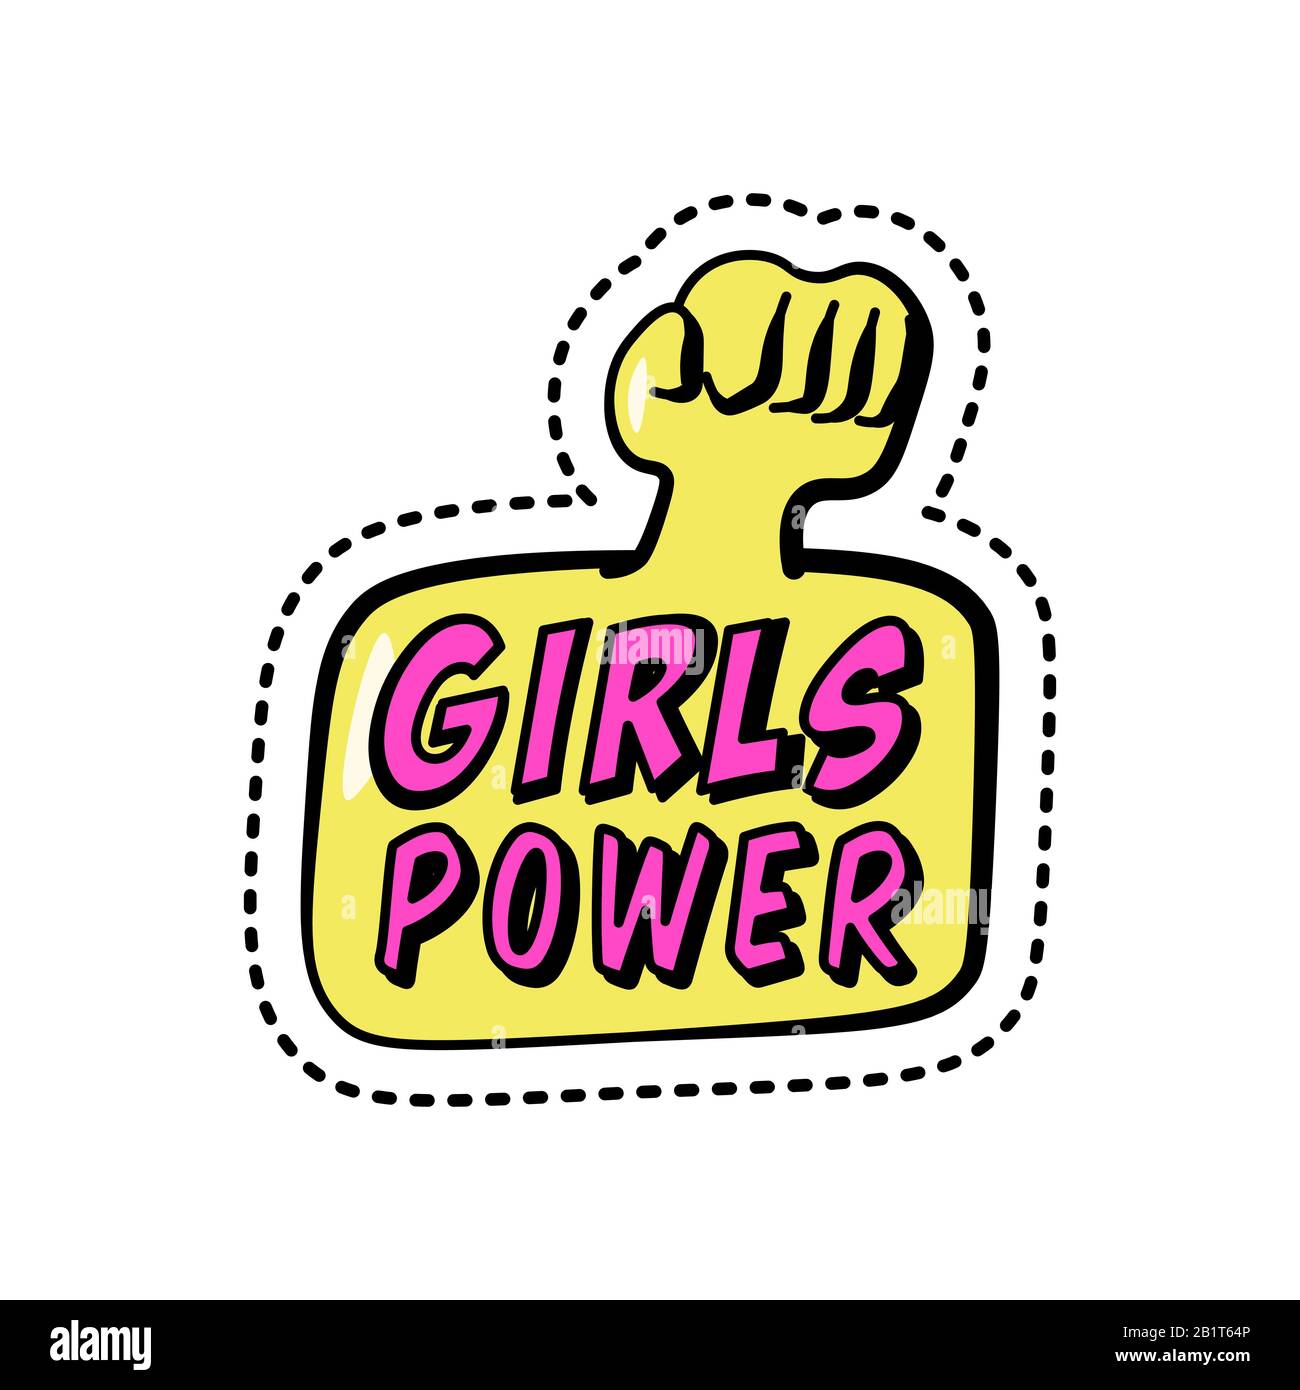 Girls power, colorful sticker with phrase and fist, patch badge with motivating slogan, feminism, vector illustration. Stock Vector